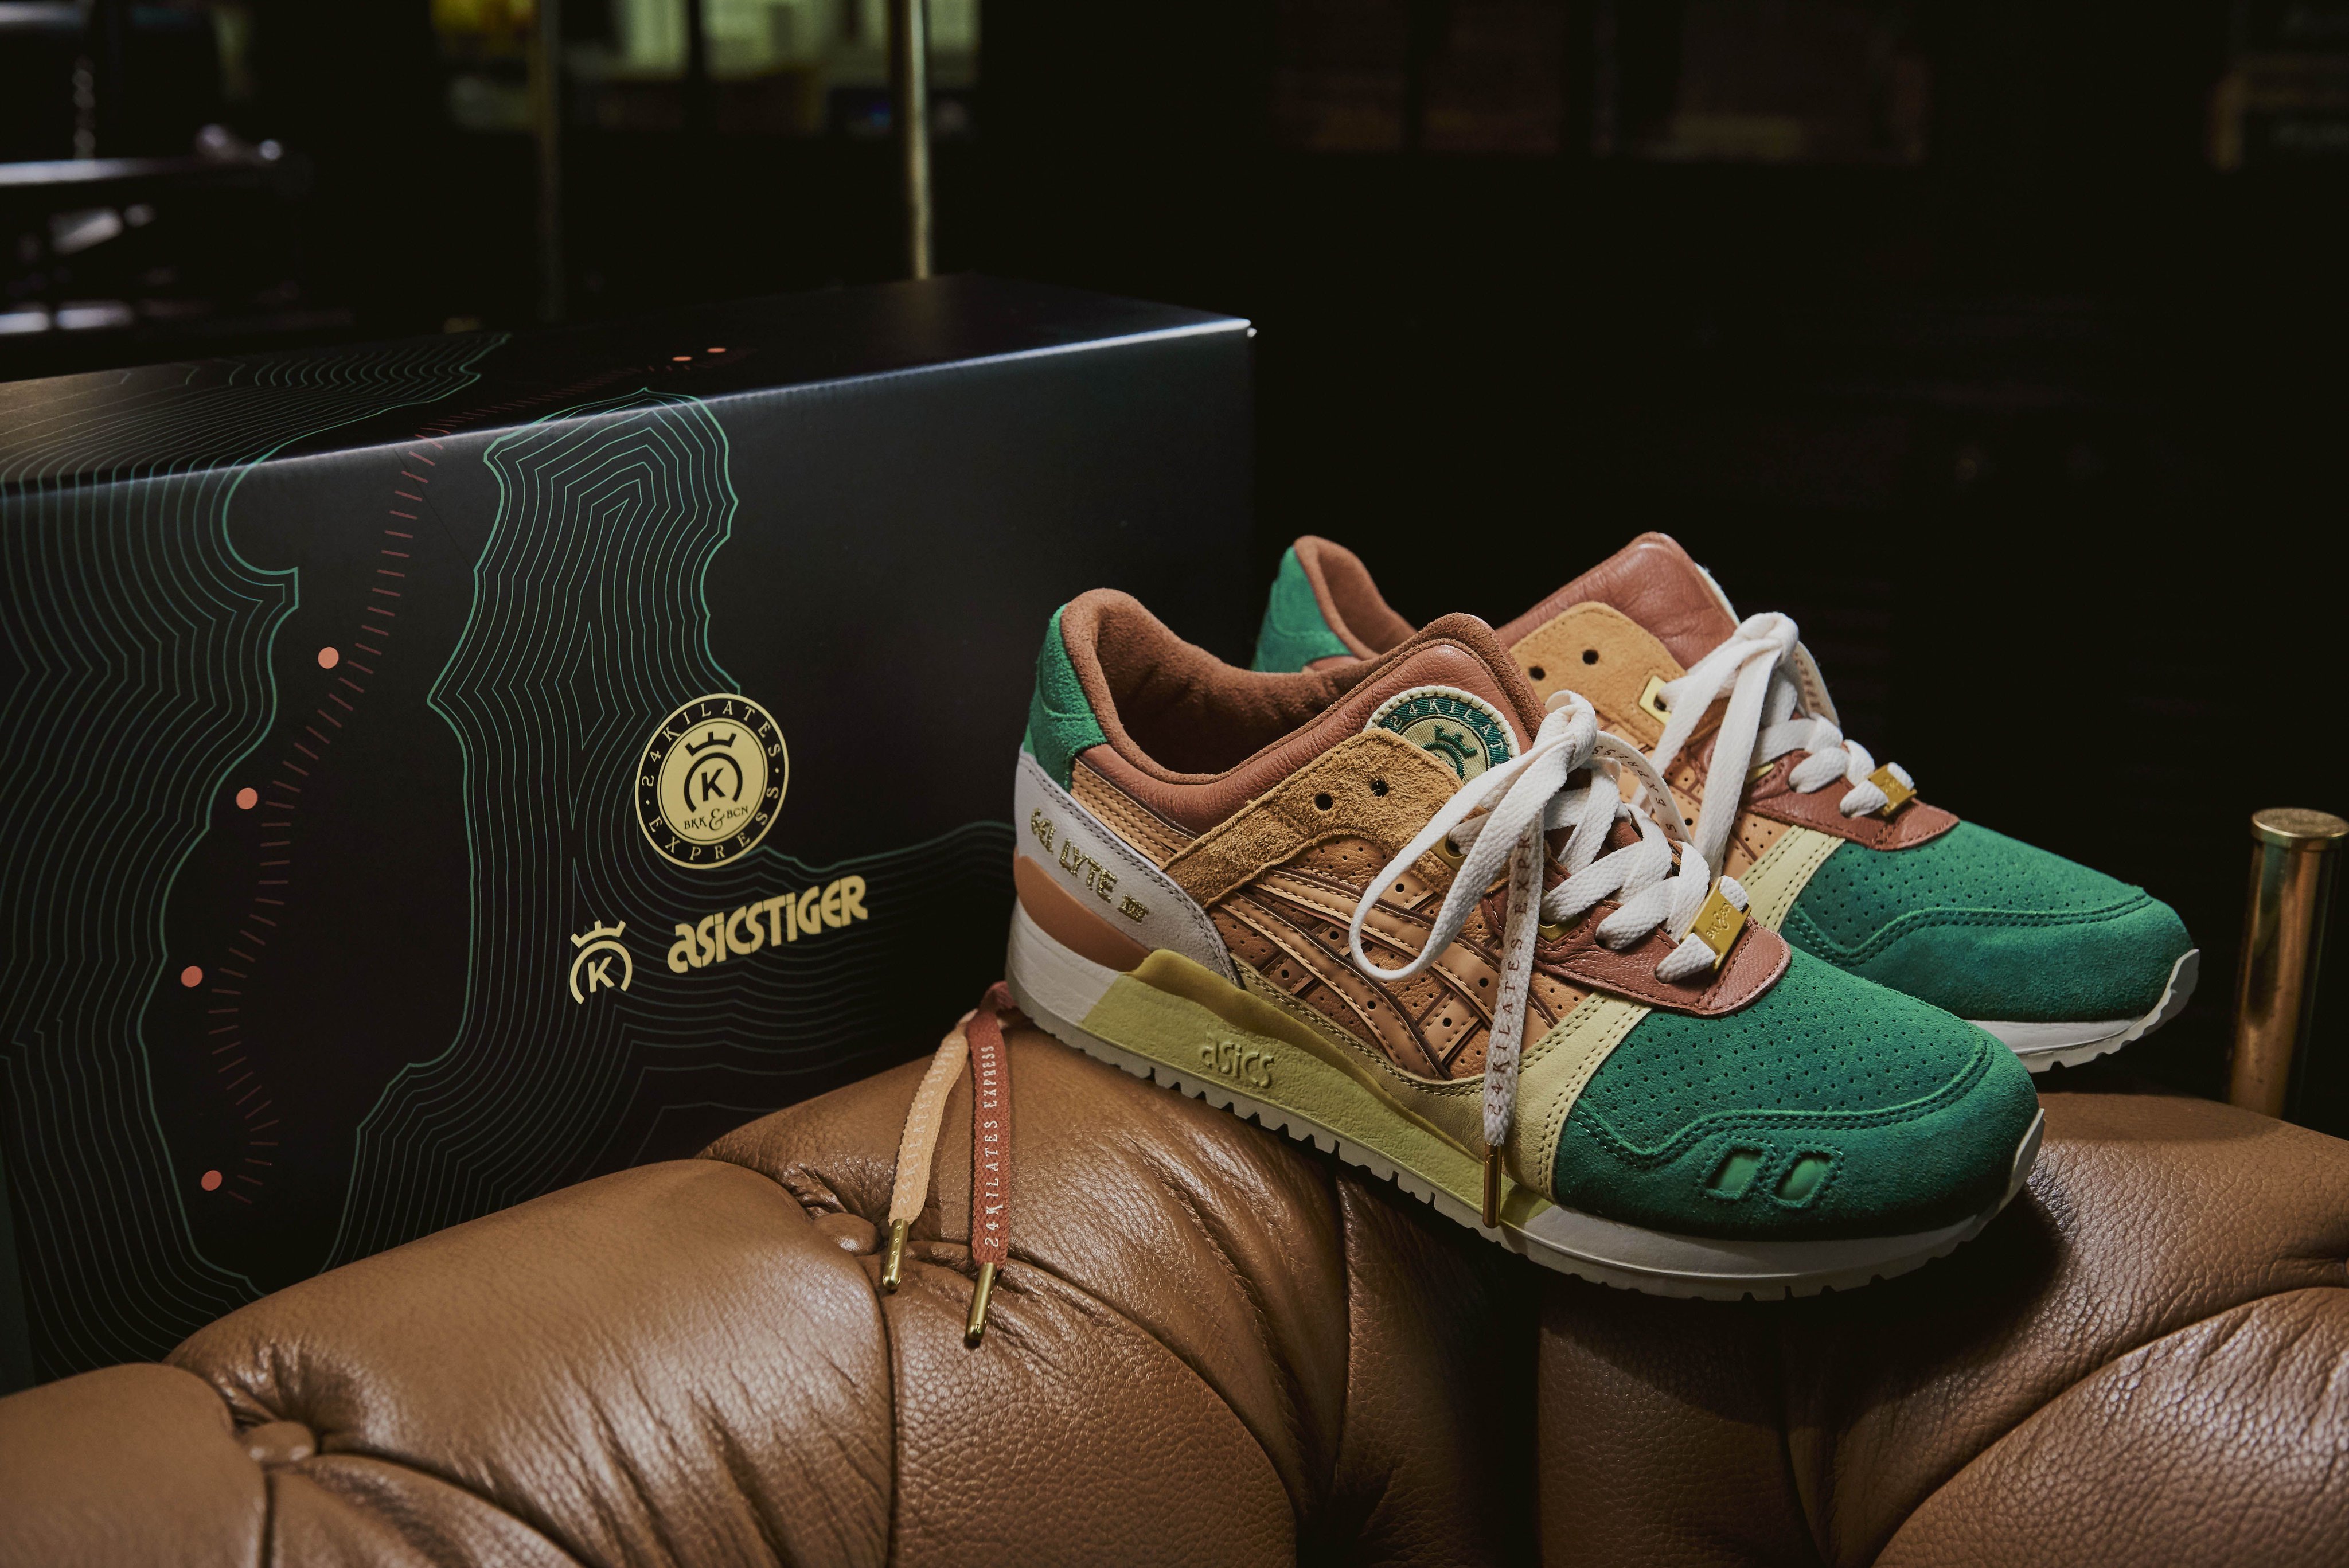 24 Kilates on Twitter: "Celebrating our 4th collaboration with Asics, we would like to honour the main inter-connector the Southeast Asia. 24 Kilates Express will be available at 24 Kilates Barcelona